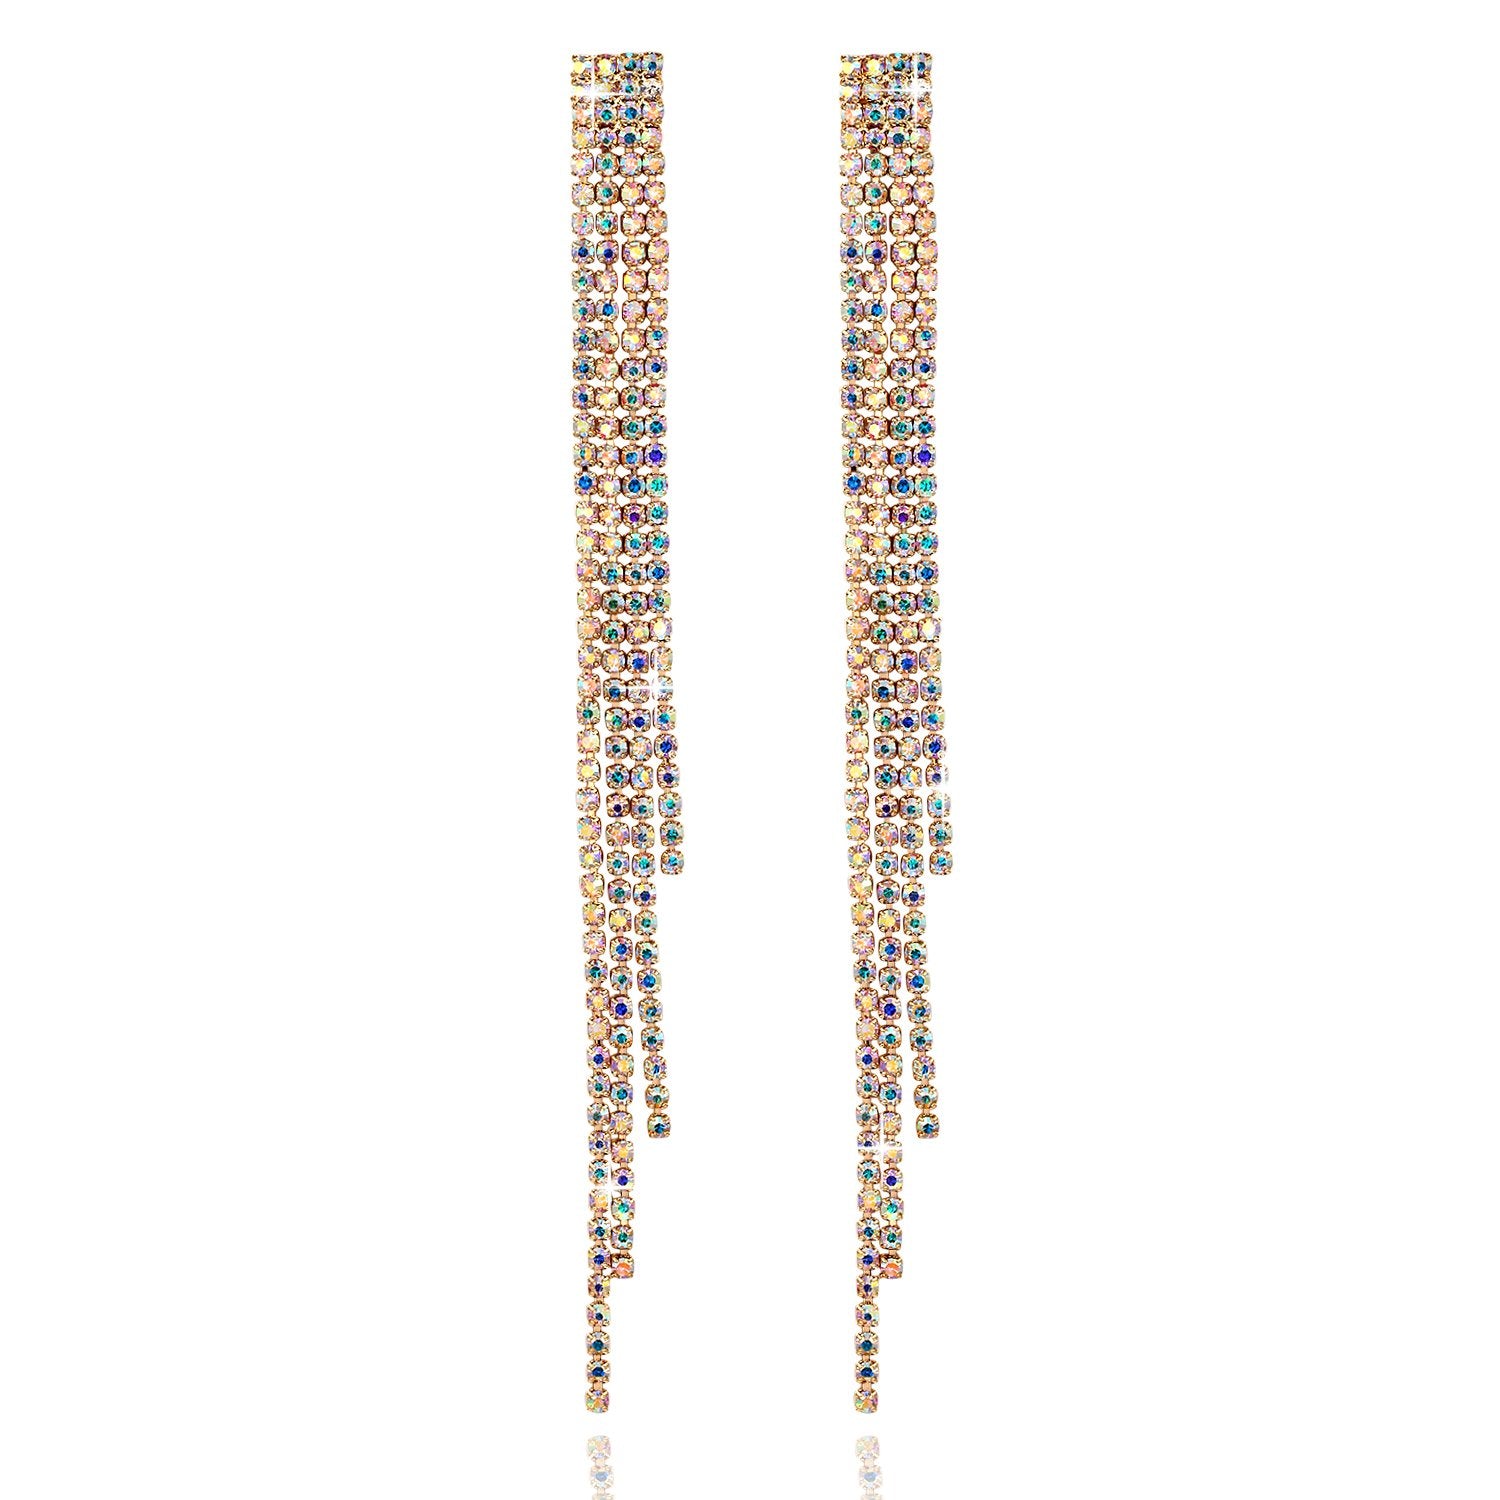 Yellow Chimes Crystals from Swarovski Glamouring Chandelier Crystal Earrings for Women and Girls